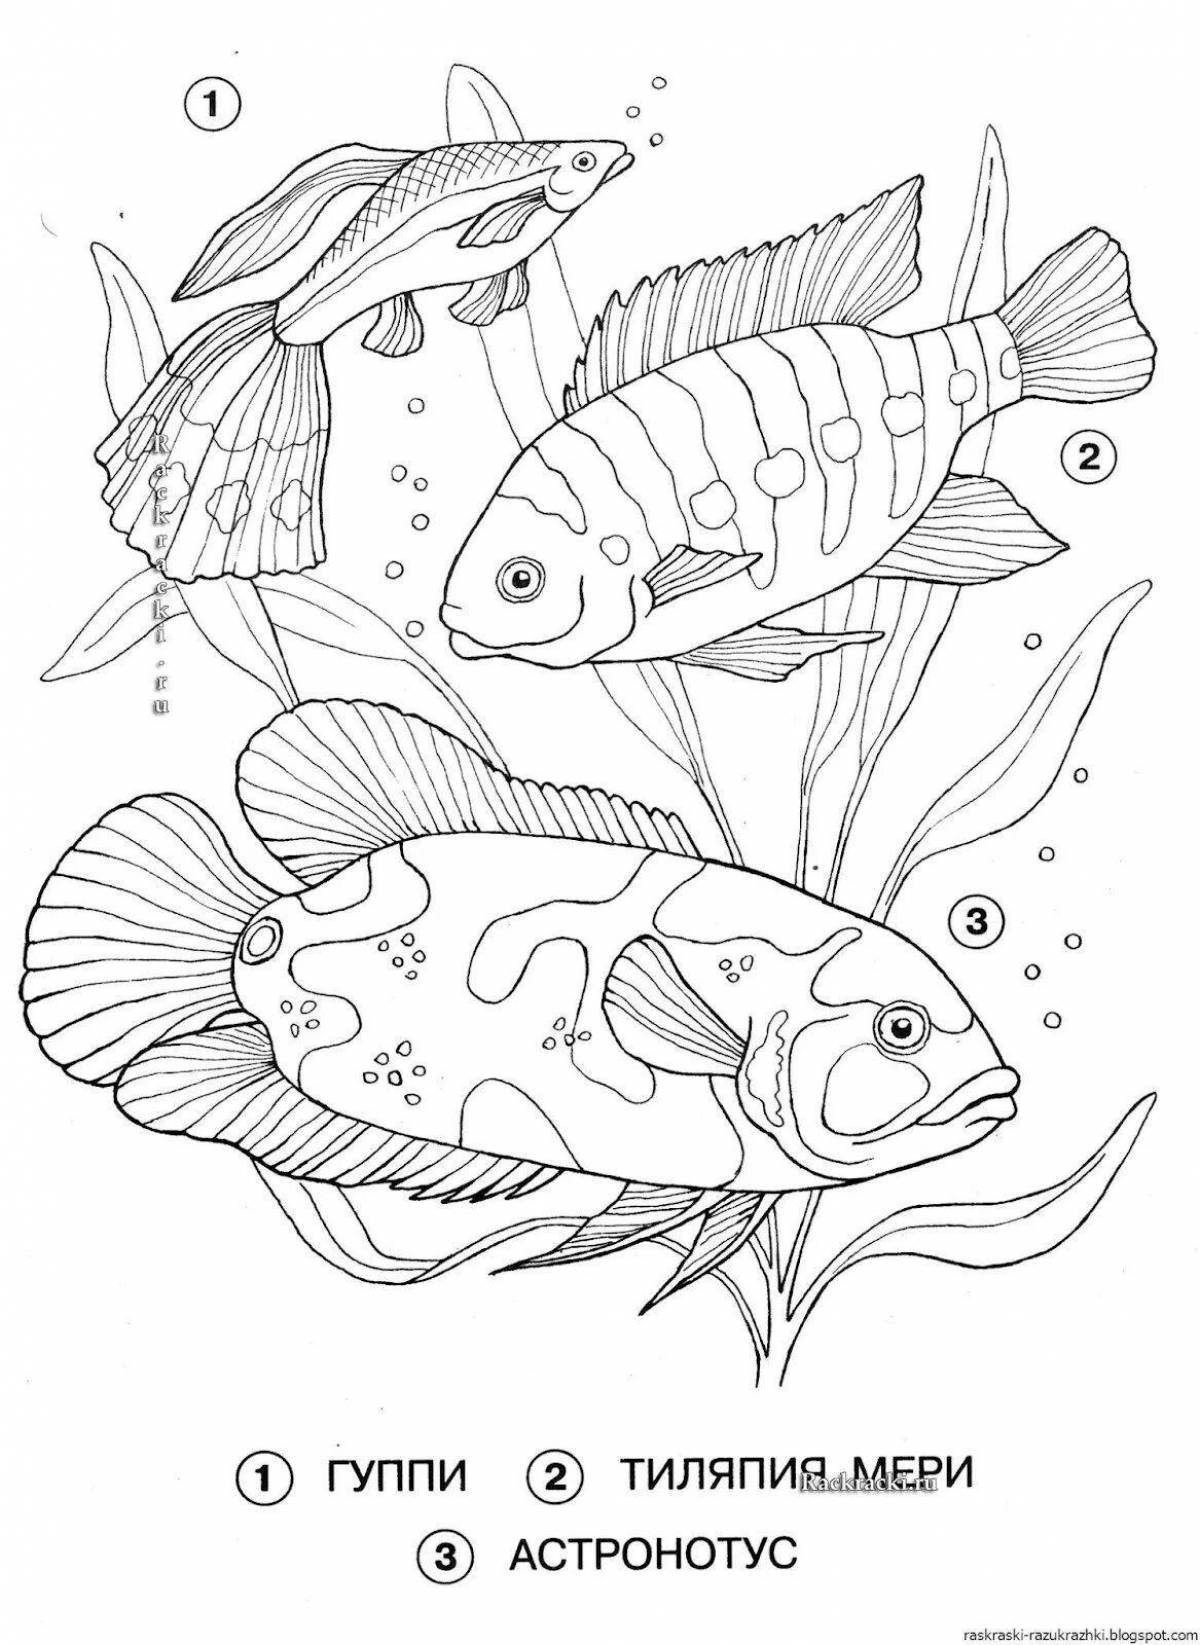 Adorable river fish coloring page